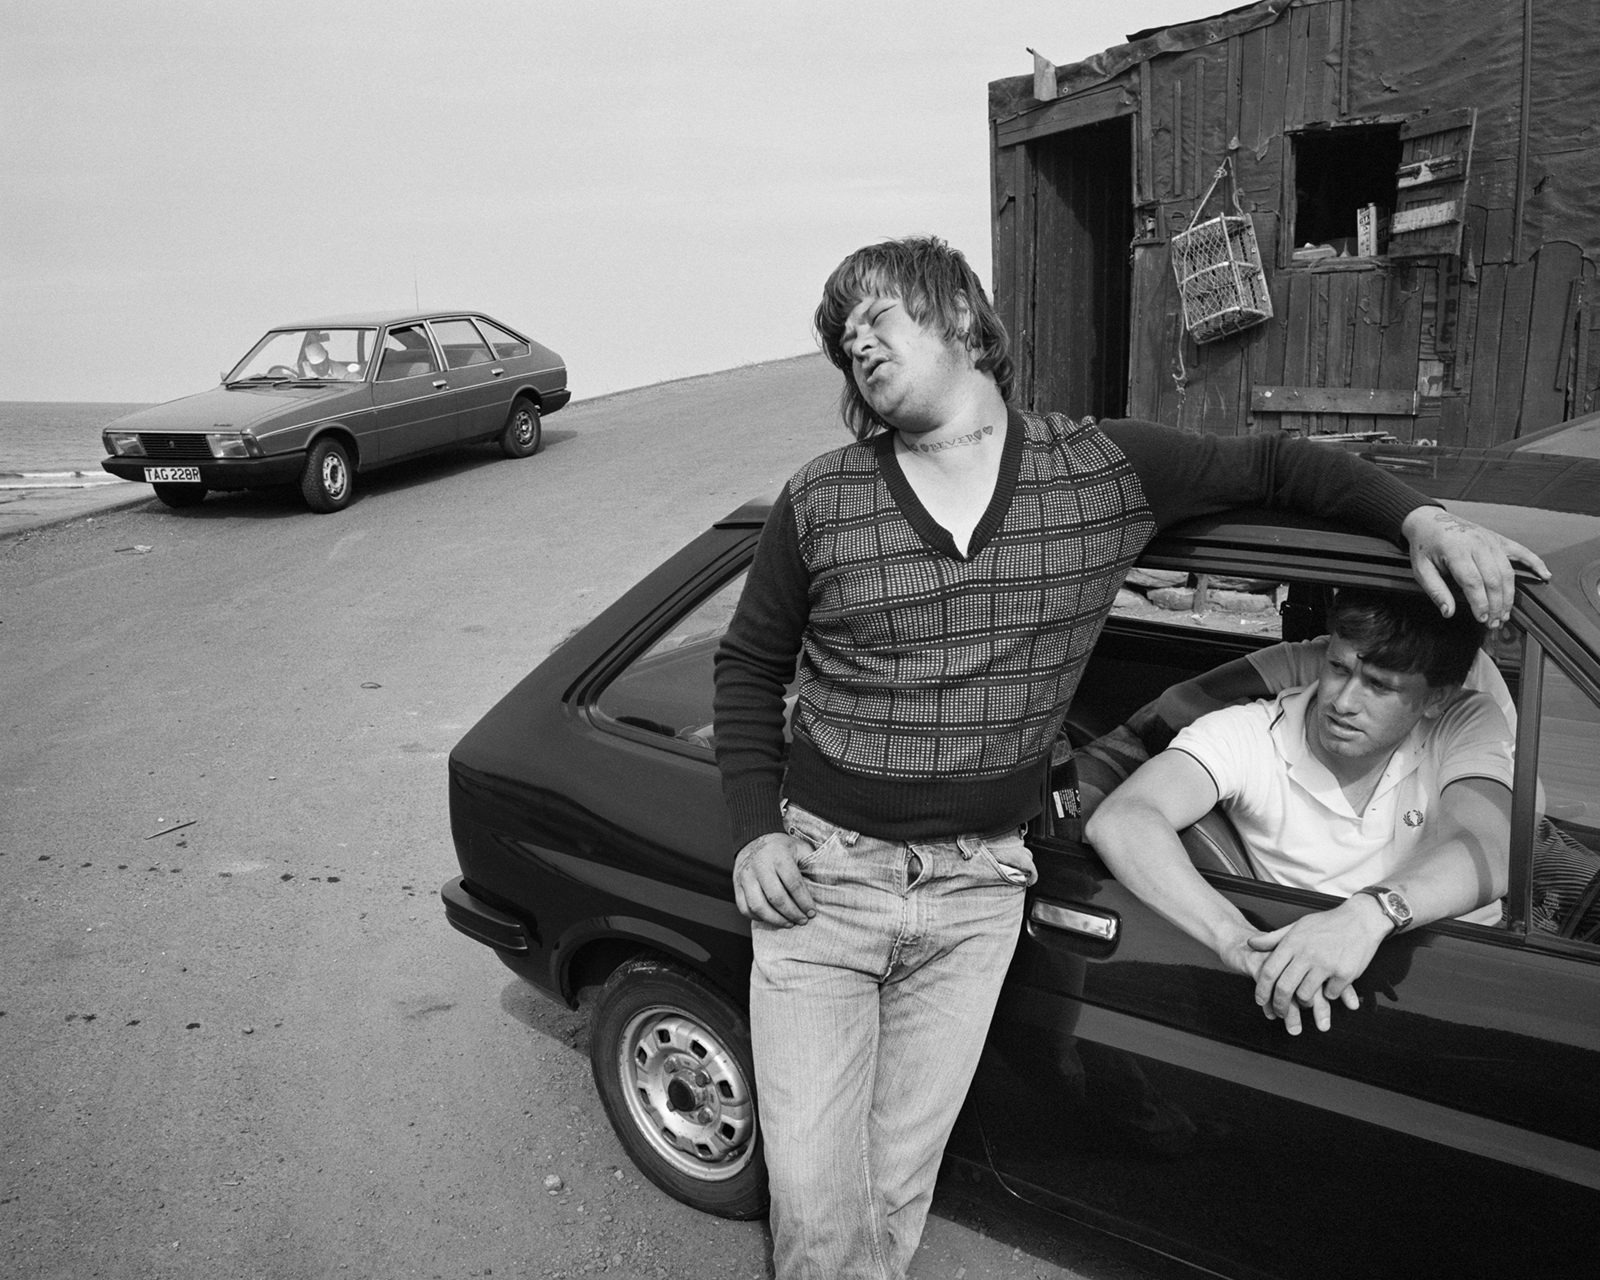 Black and white photograph of two people hanging out by a car, which appears in the new Chris Killip exhibition